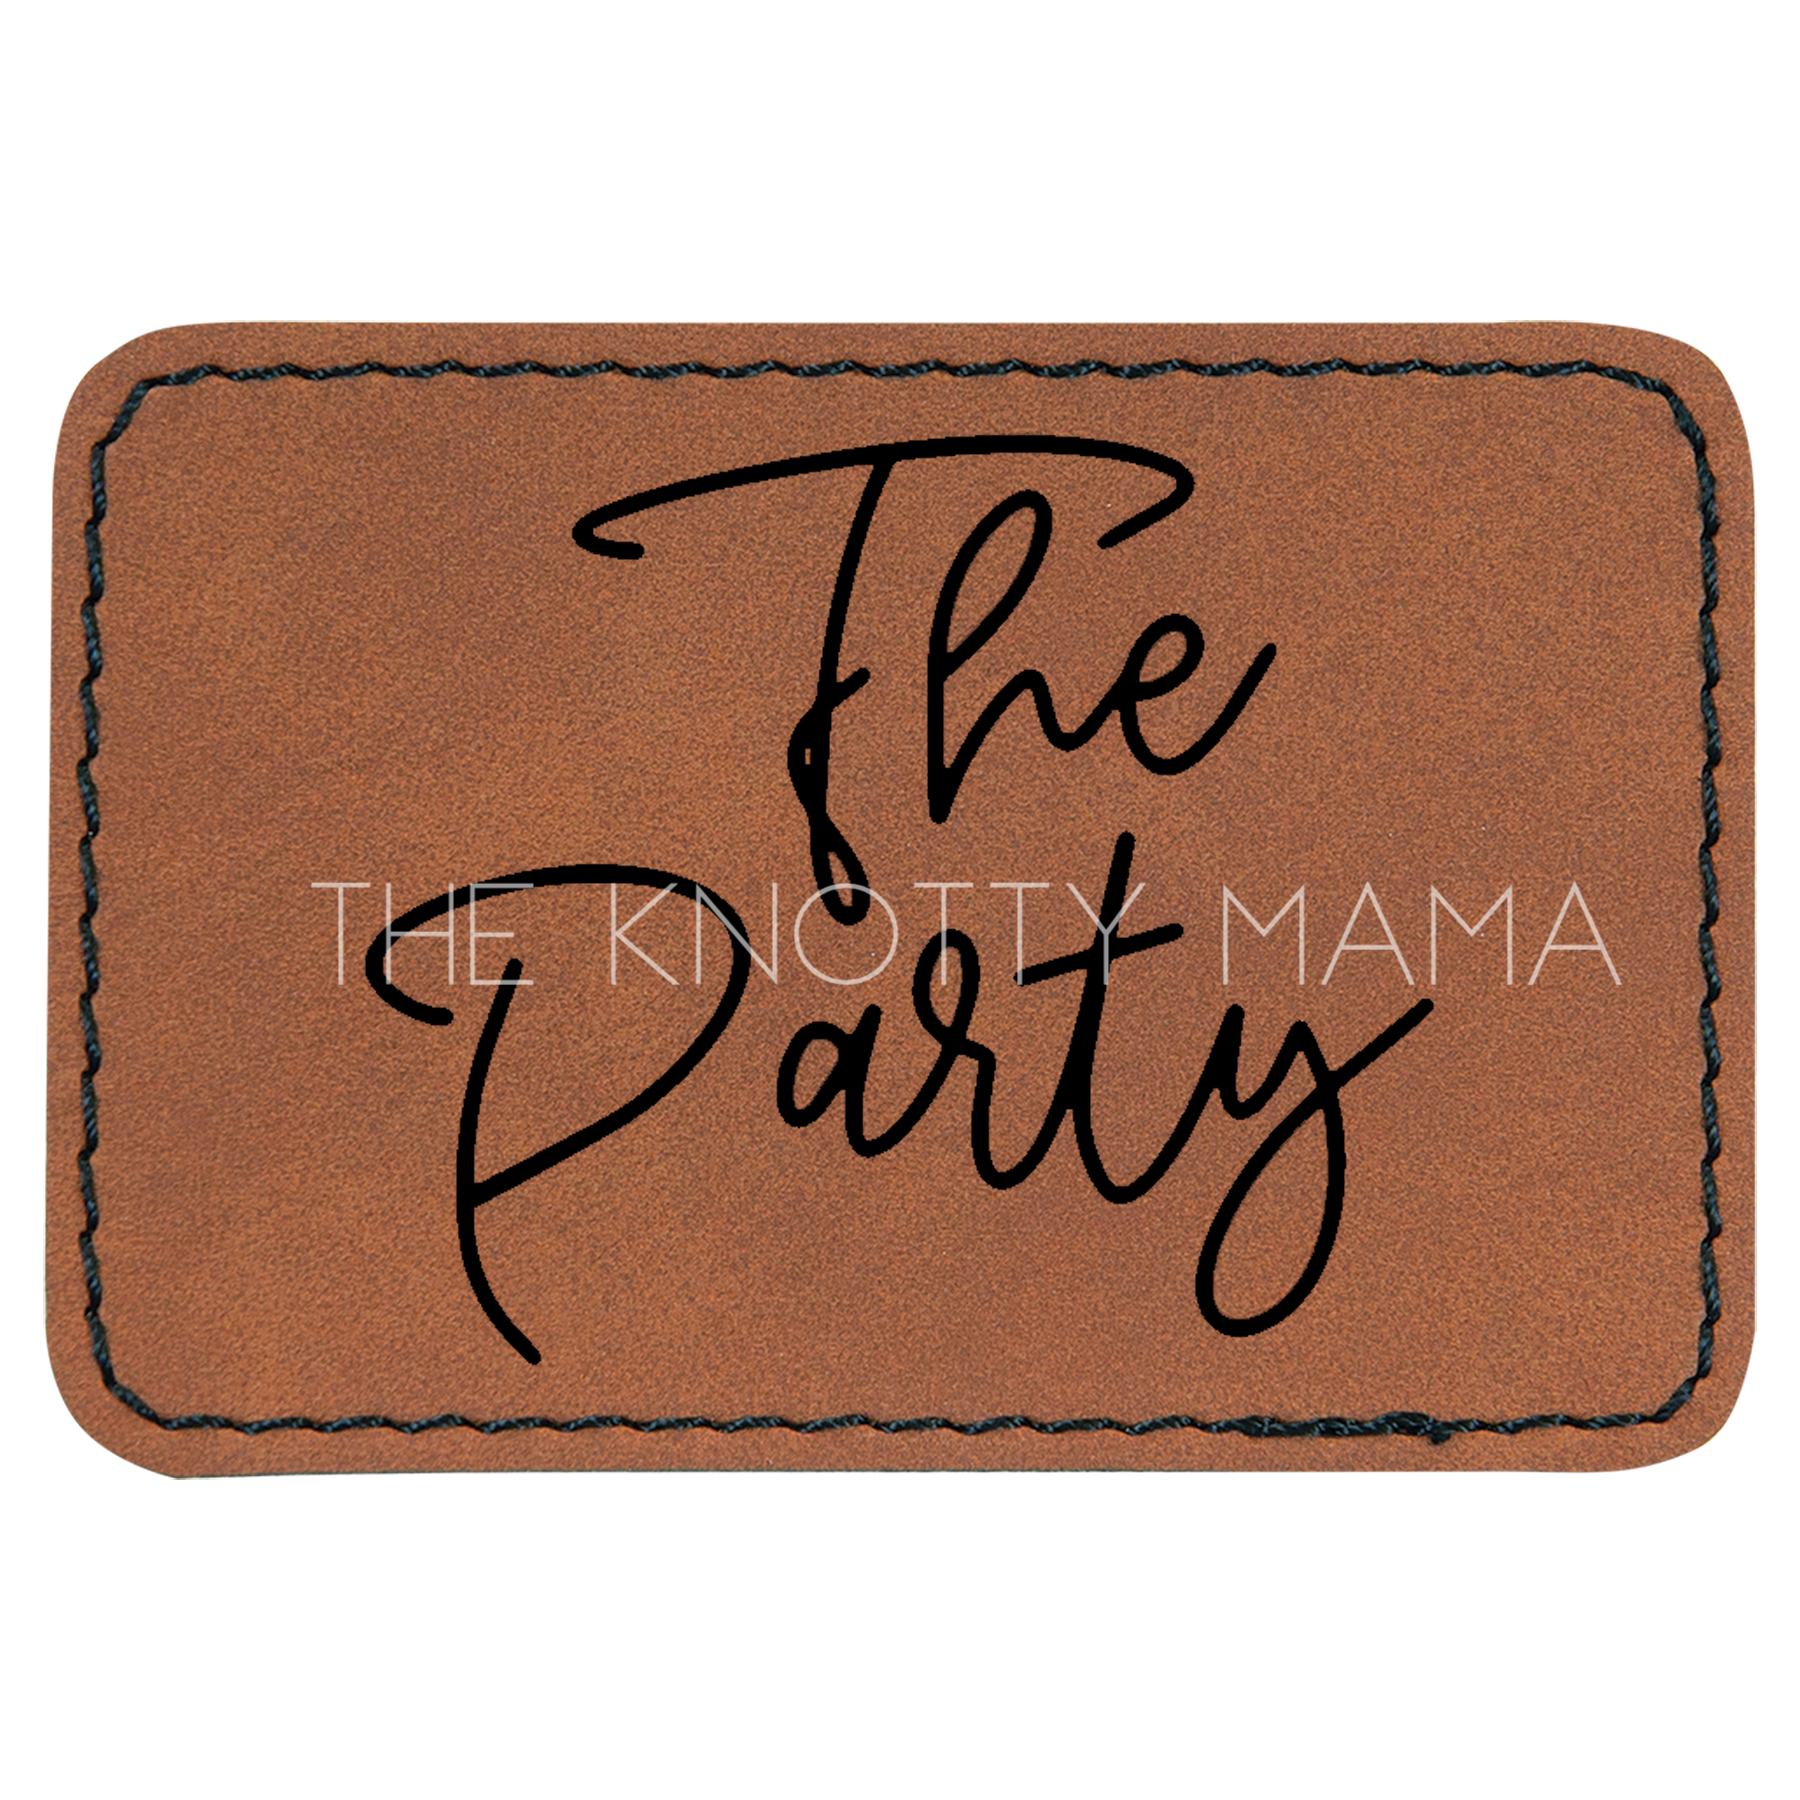 The Party Patch